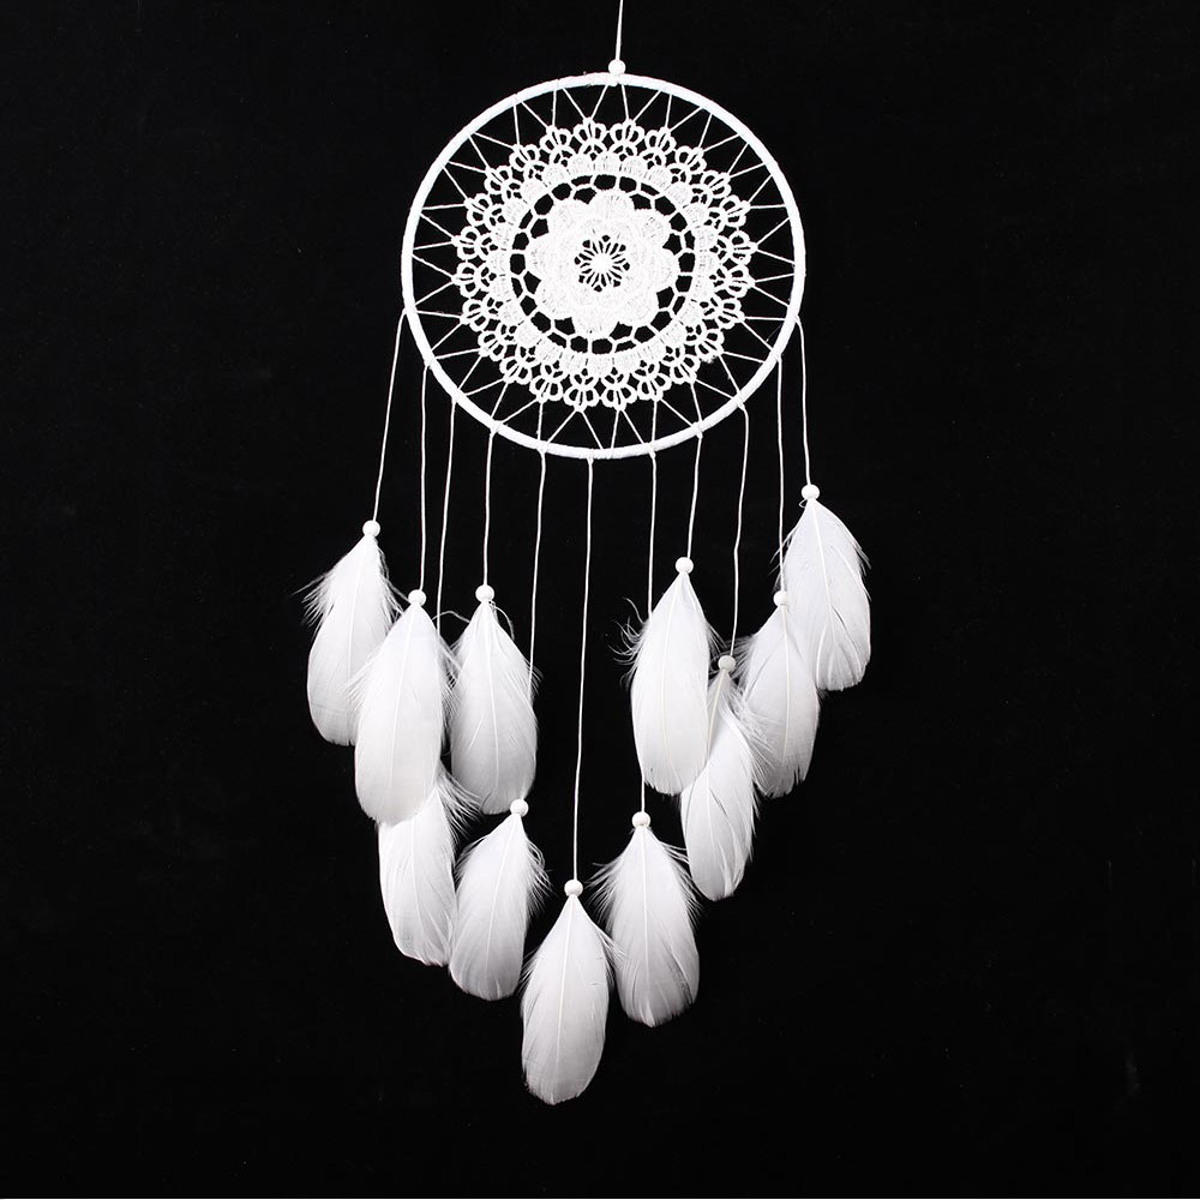 Handmade Lace Dream Catcher with Feathers Wall Hanging Decoration Ornament White